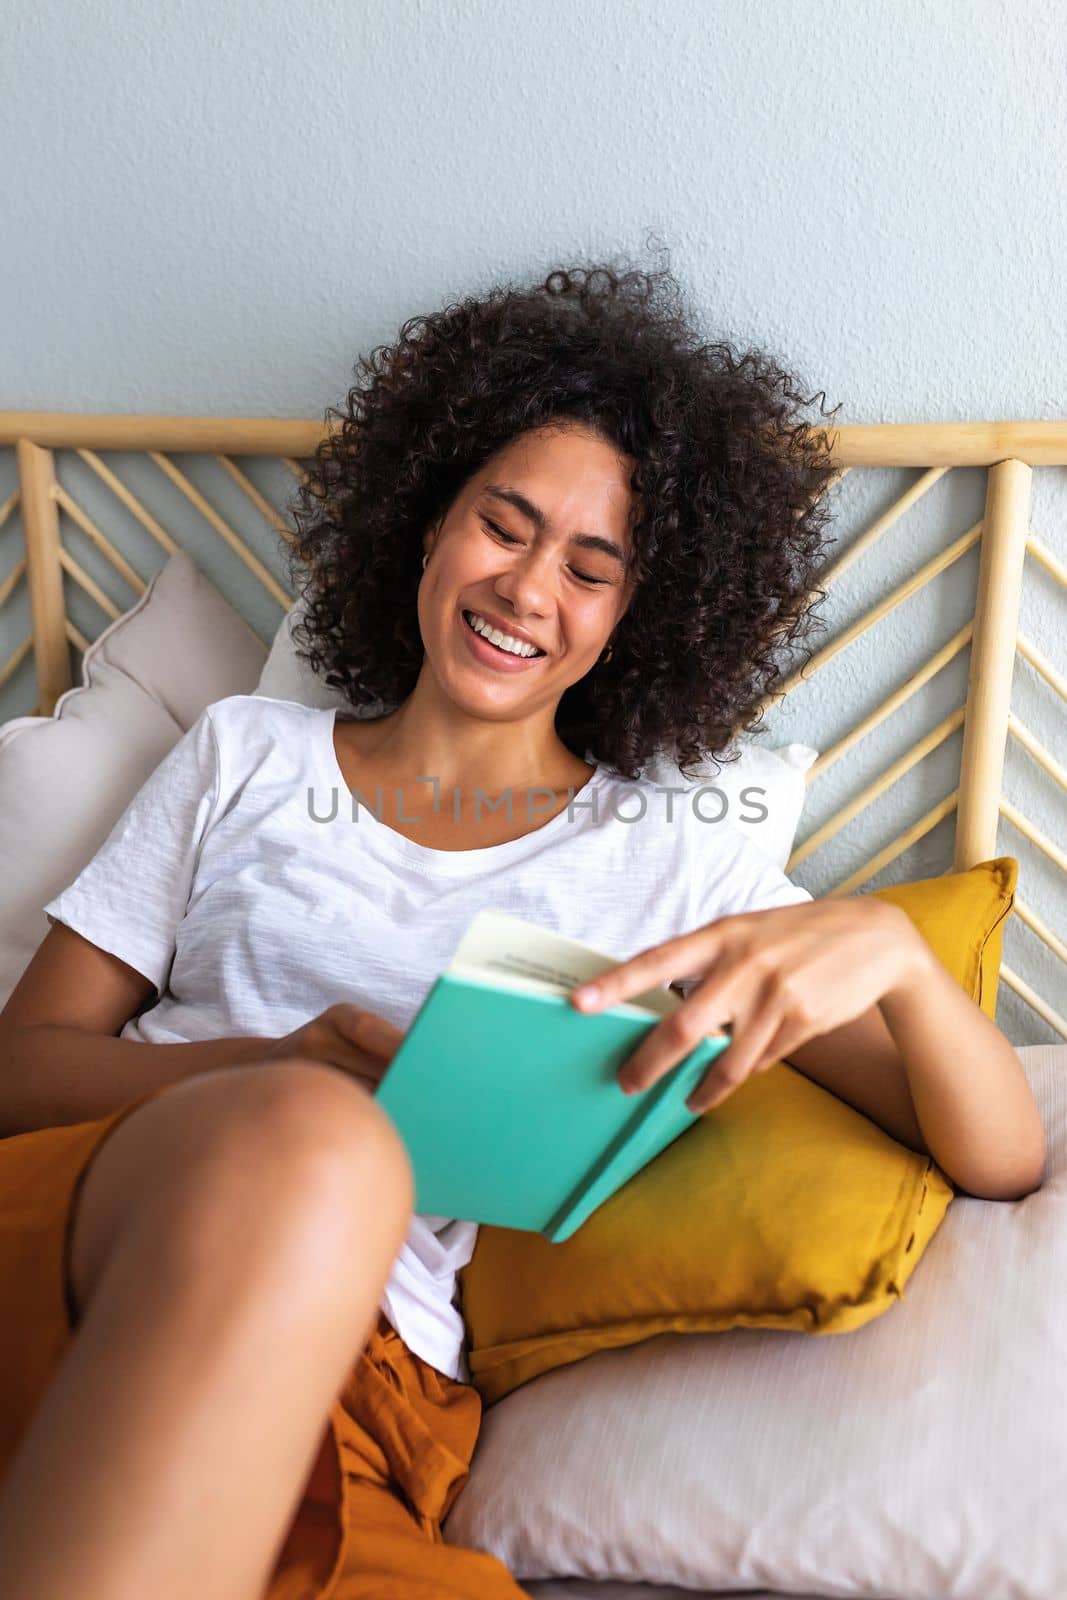 Vertical portrait of young African american woman with curly hair reading a book, laughing sitting comfortably on cozy bed. Lifestyle concept.